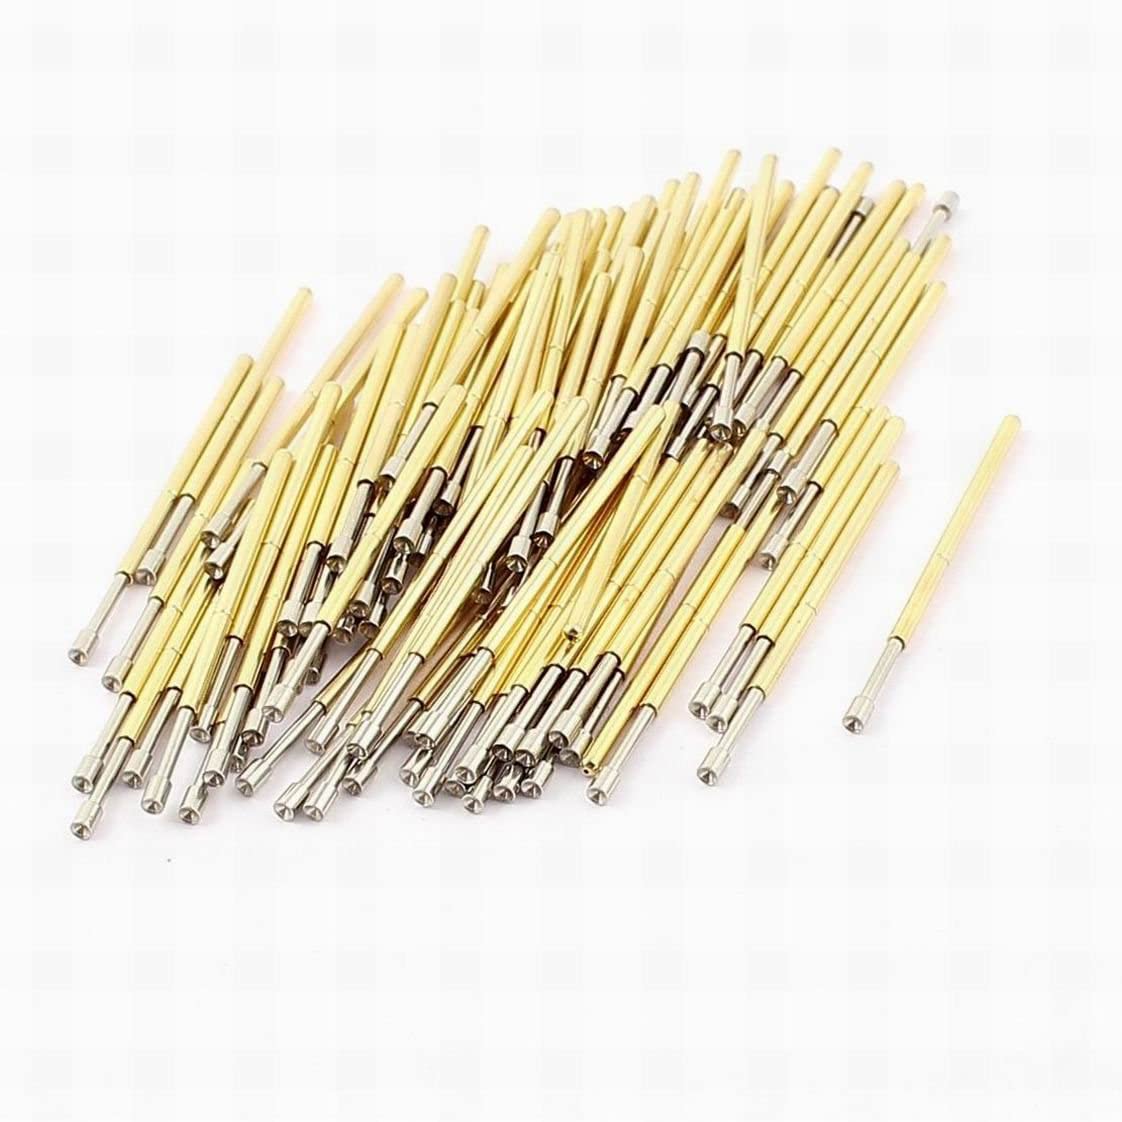 uptell 100pcs p100a 15mm dia concave tip spring loaded test probes pin 33mm